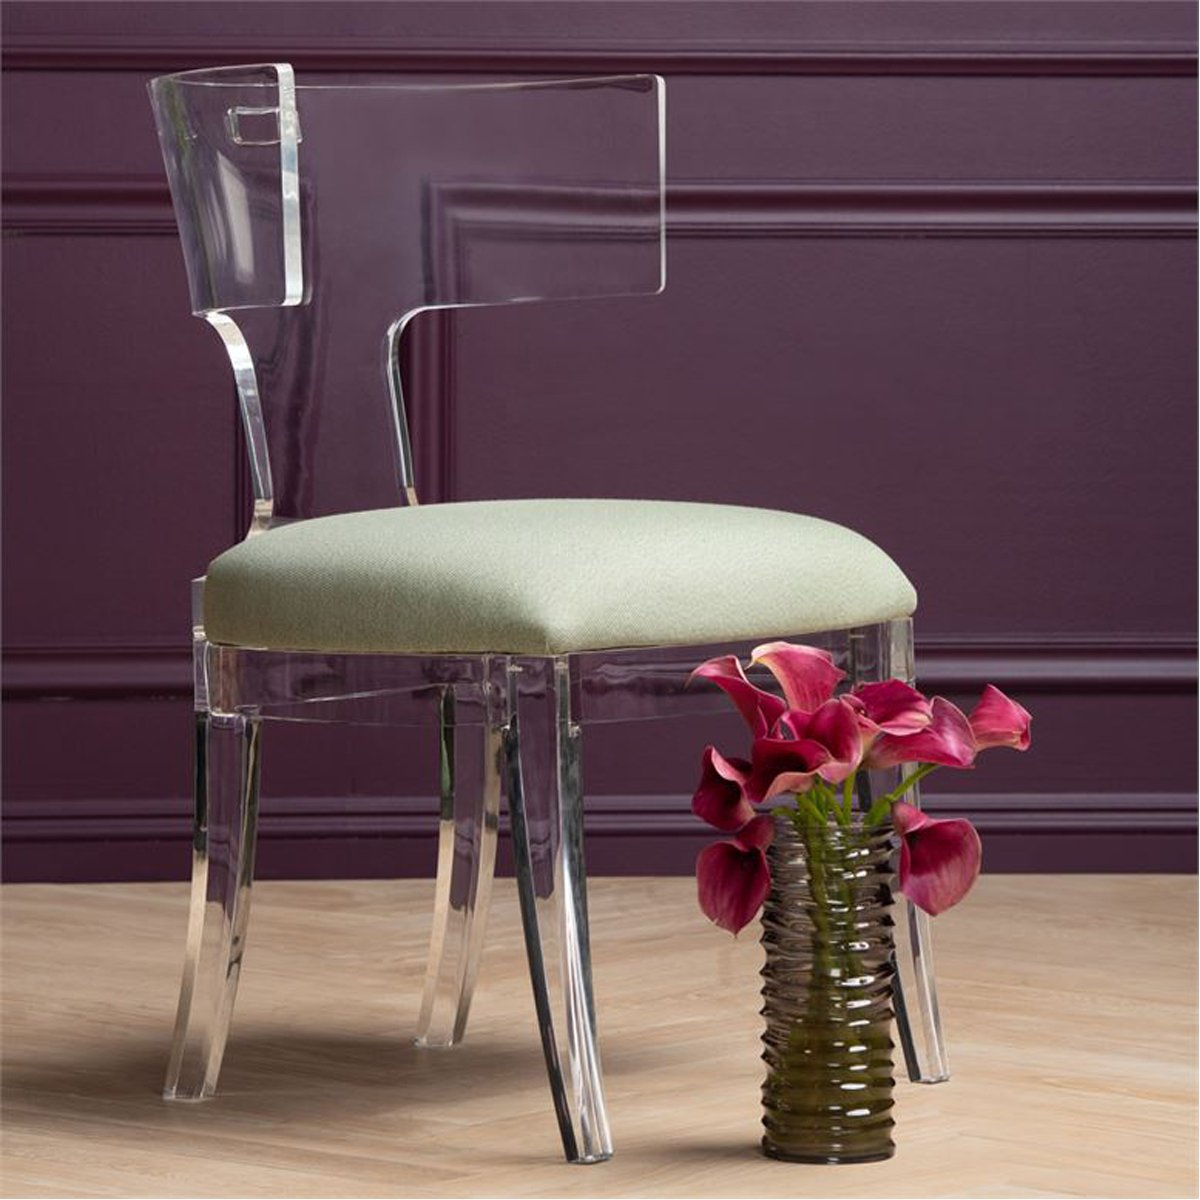 Made Goods Gibson Acrylic Wingback Dining Chair in Kern Mix Fabric